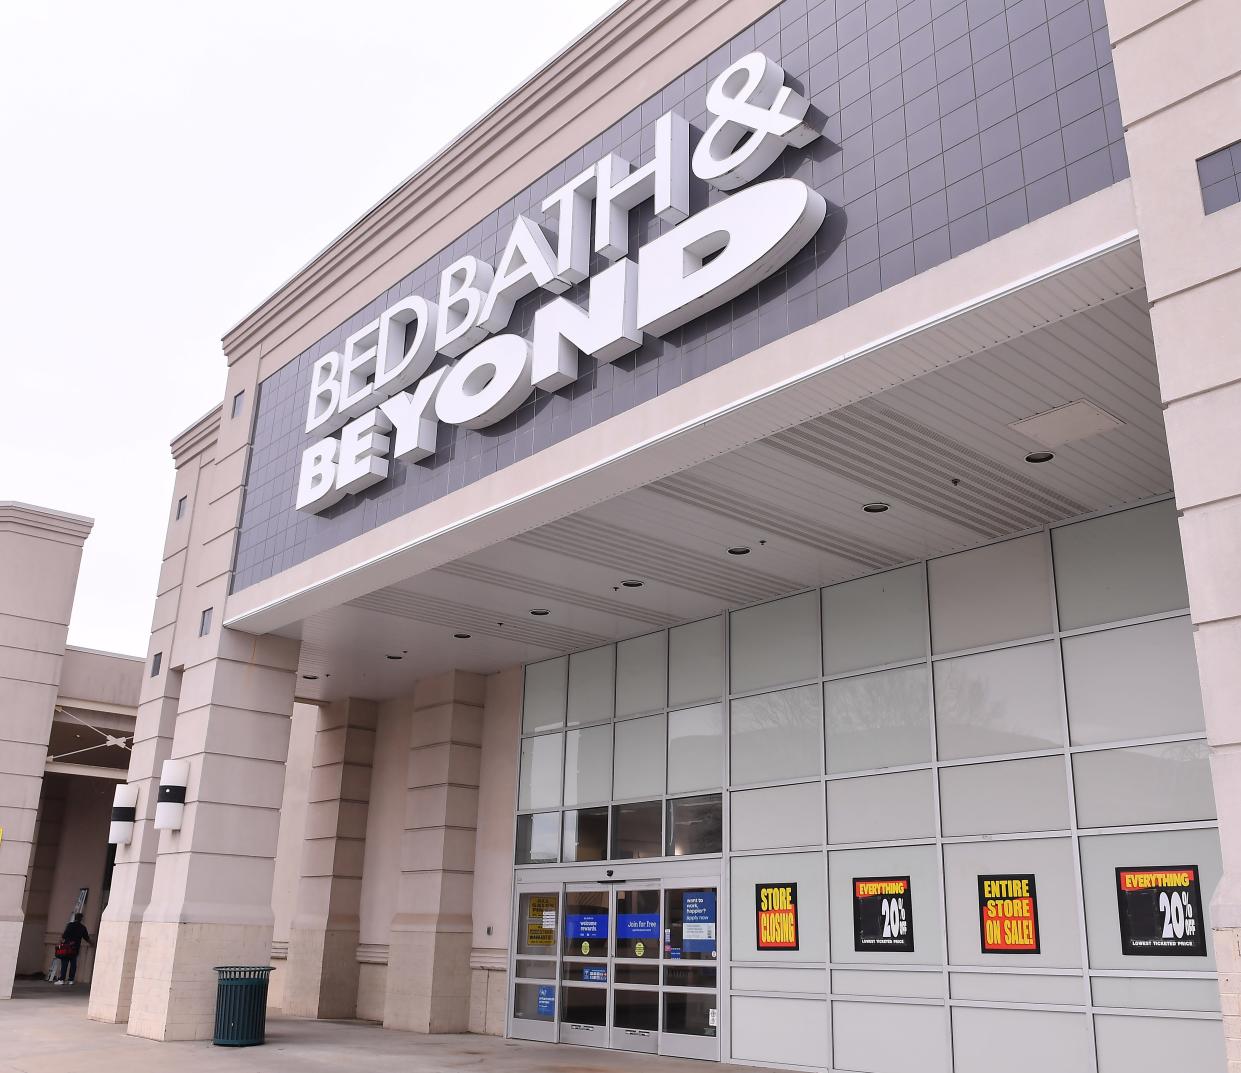 Bed Bath & Beyond is closing more than 100 stores, including one in Okemos.